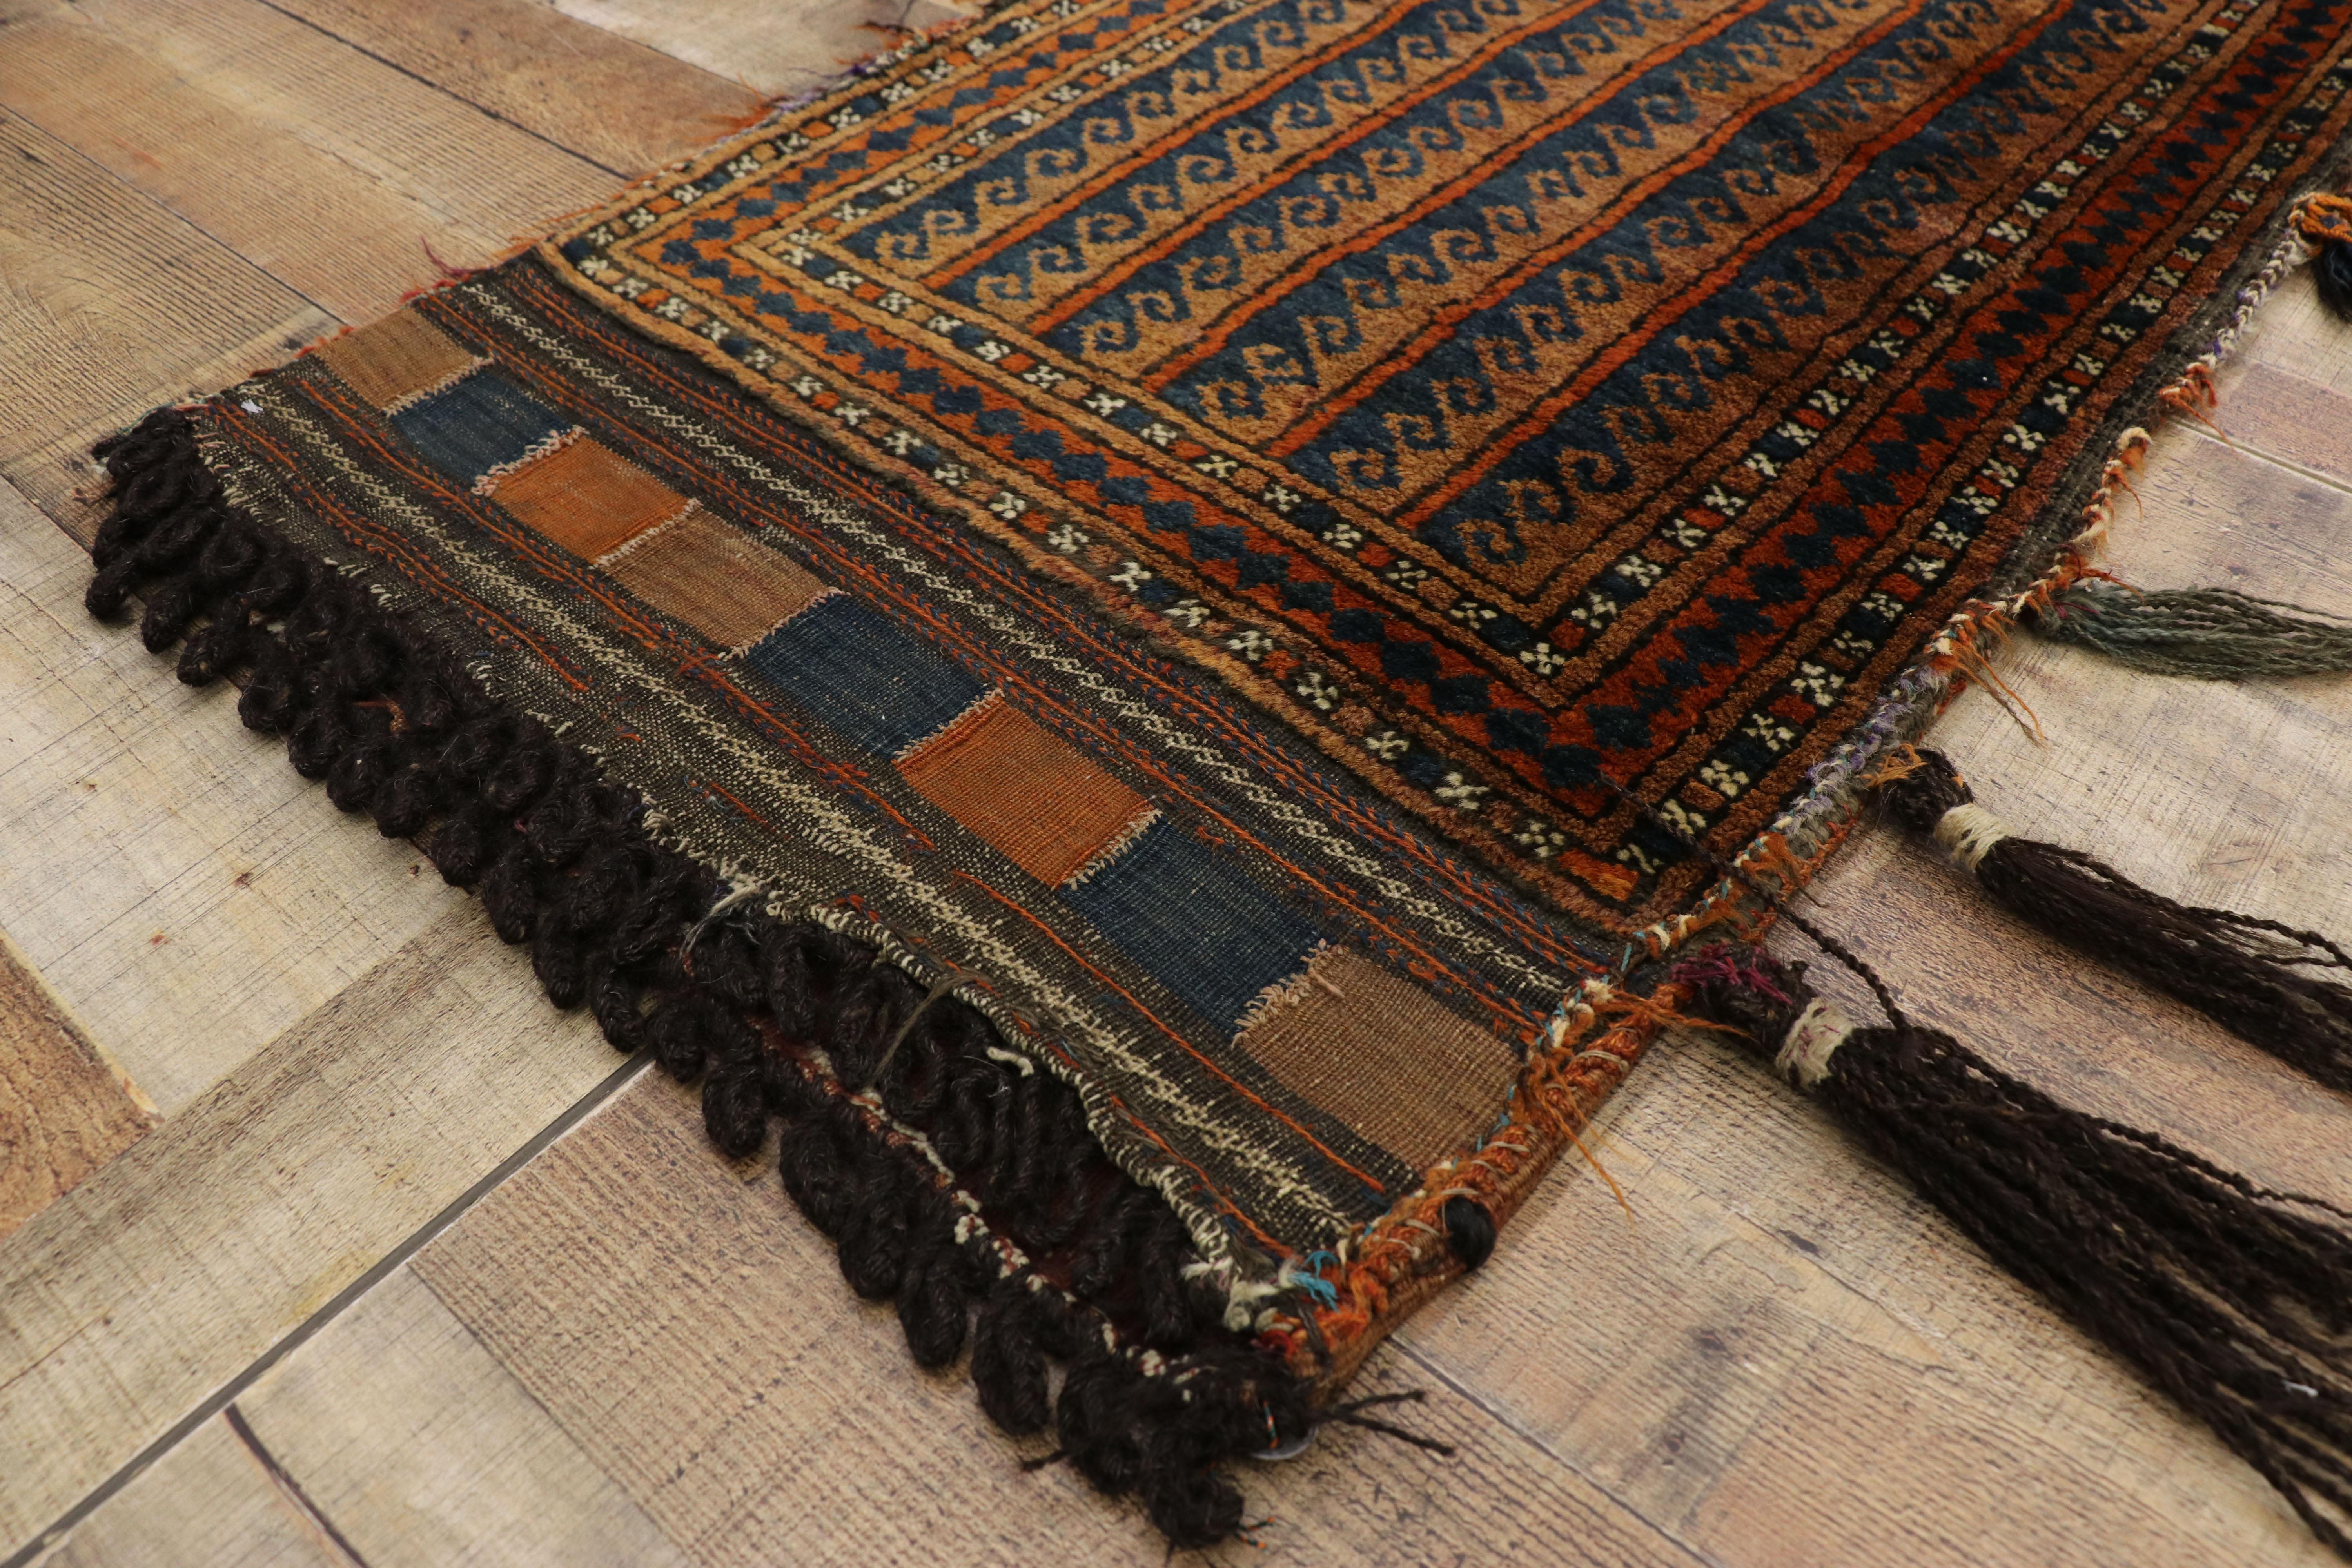 20th Century Antique Afghan Baluch Balisht Bag, Tribal Style Tapestry, Nomadic Wall Hanging